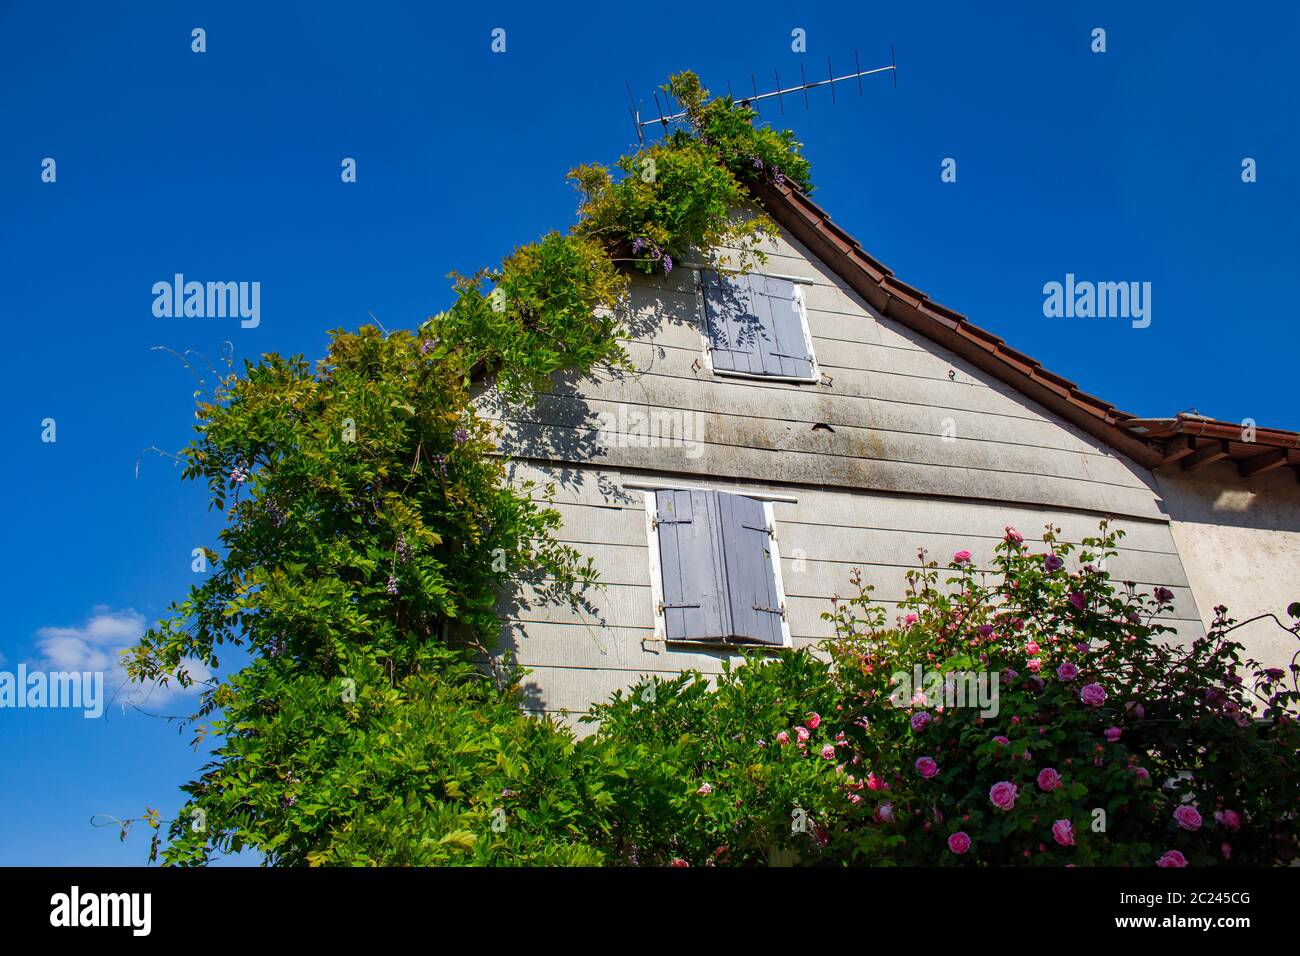 House facade overgrown with plants and vines with blue sky Stock Photo